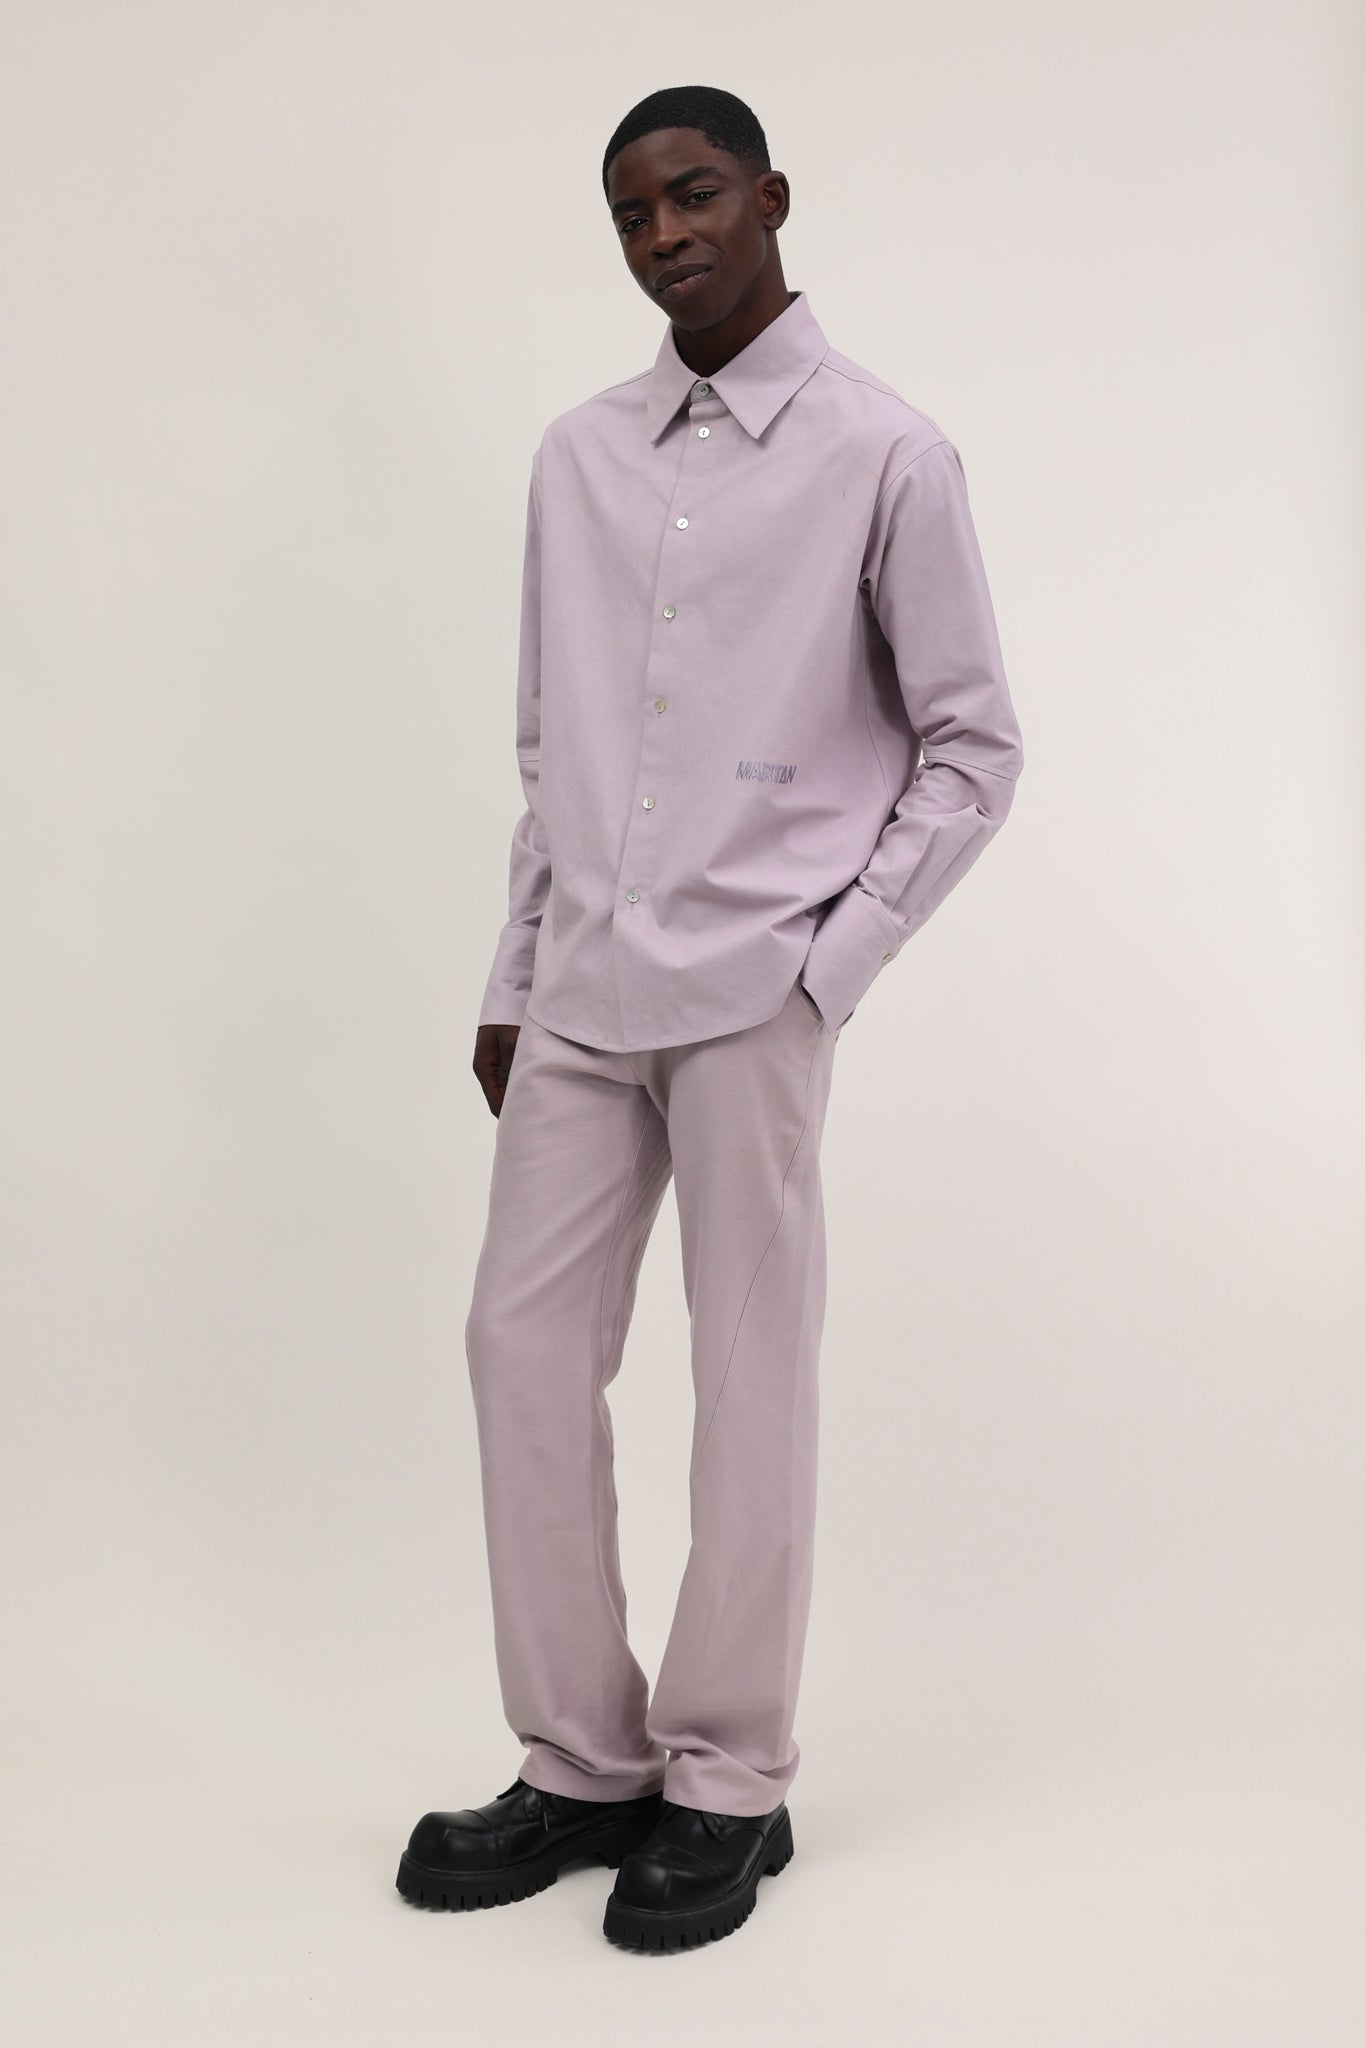 Marchi Shirt Dusted Lilac